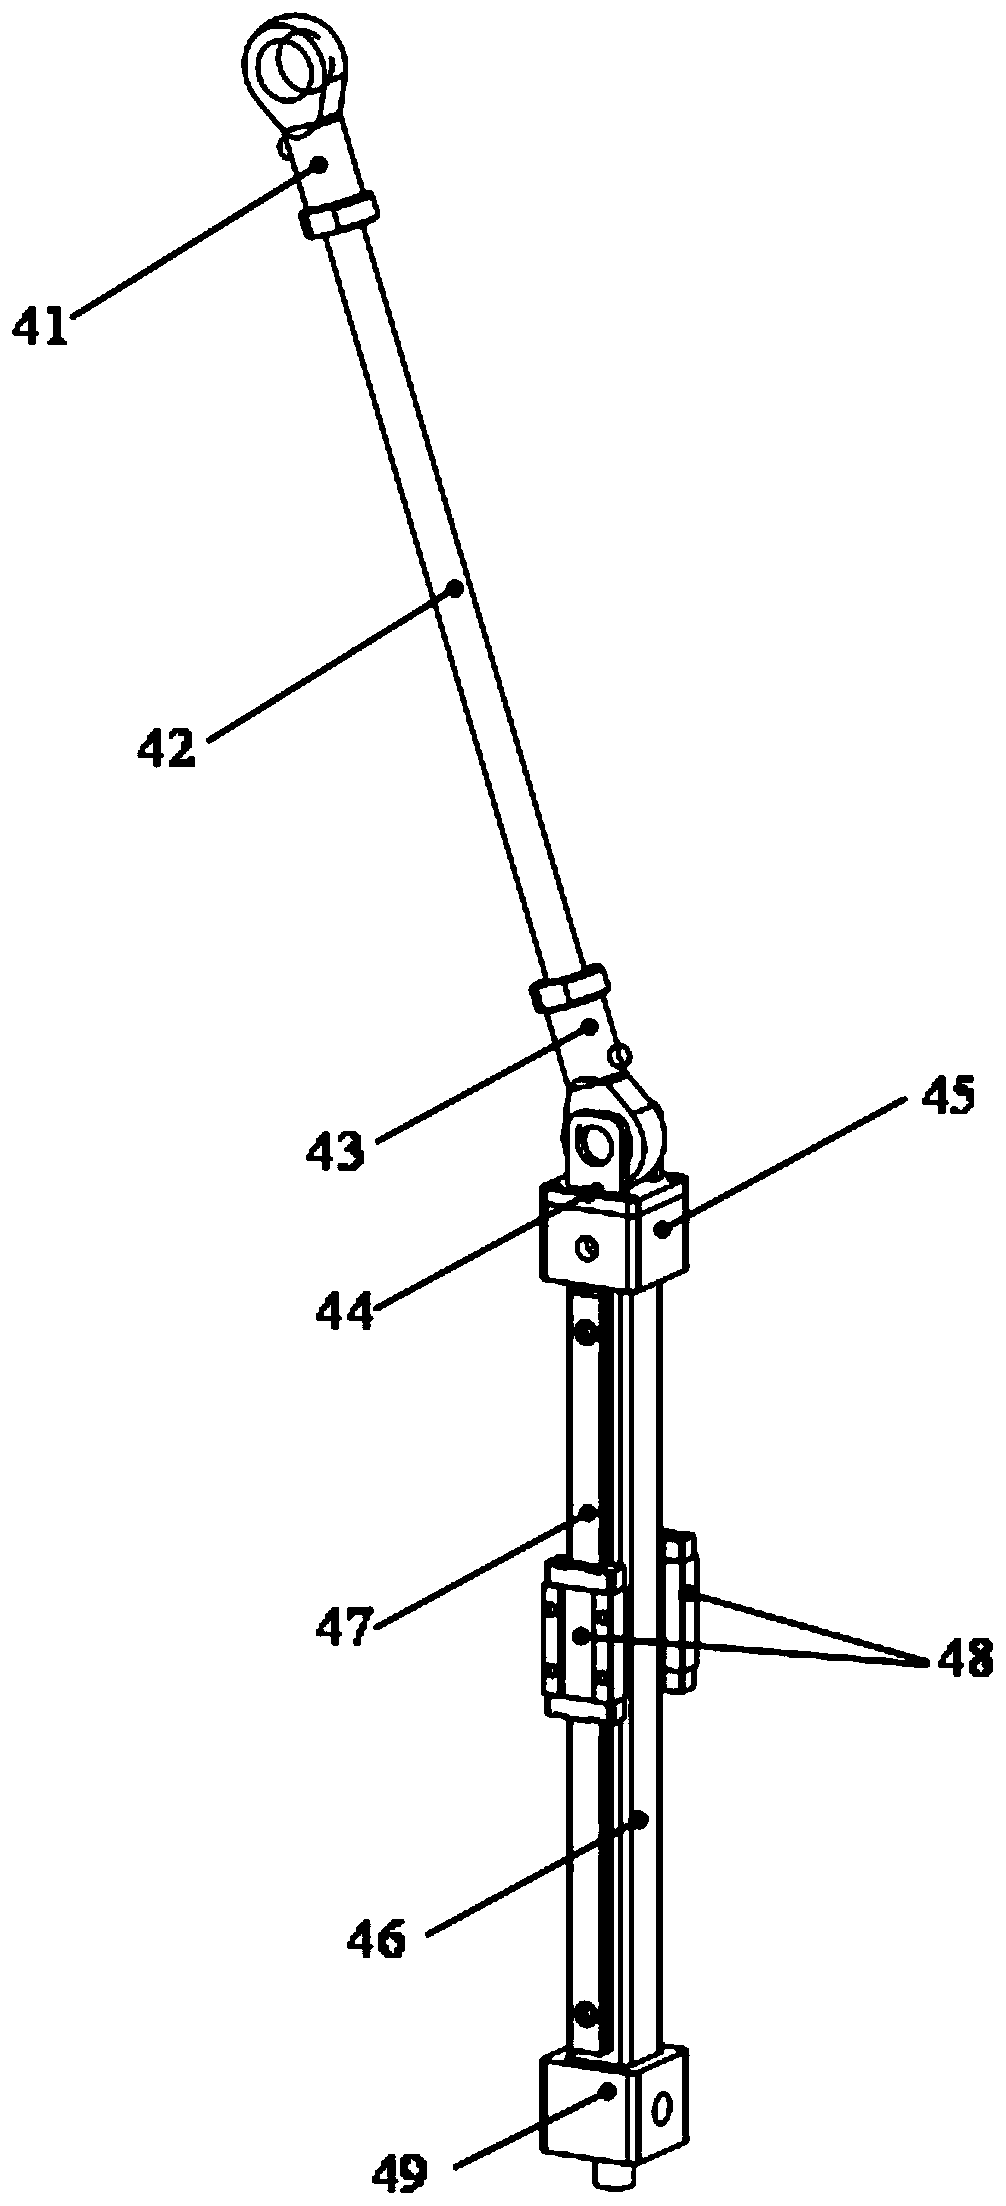 Camera adjusting device based on parallel mechanism two-degree-of-freedom redundant driving